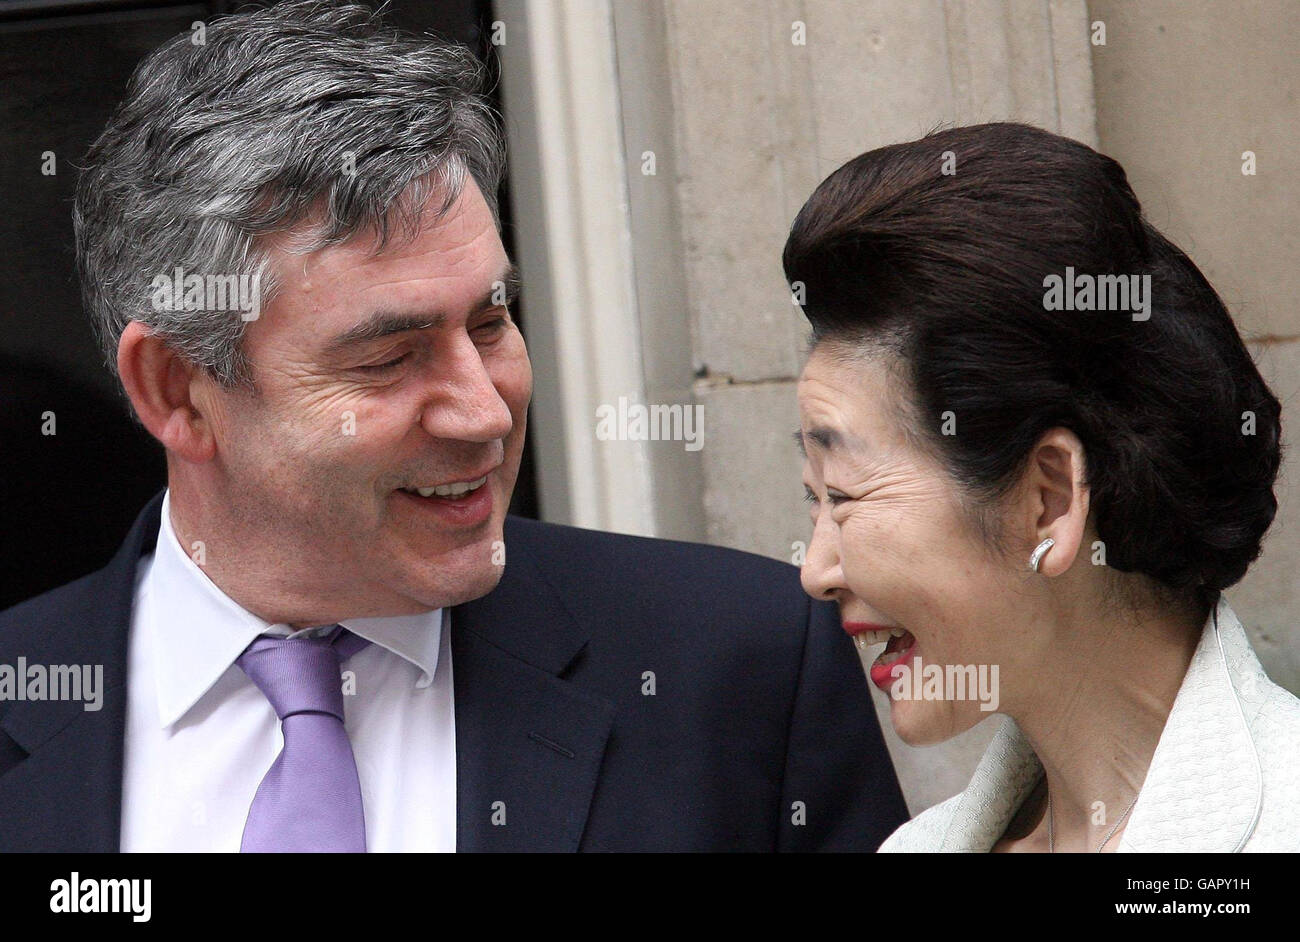 Chats To The Japanese Prime Ministers Wife High Resolution Stock ... pic